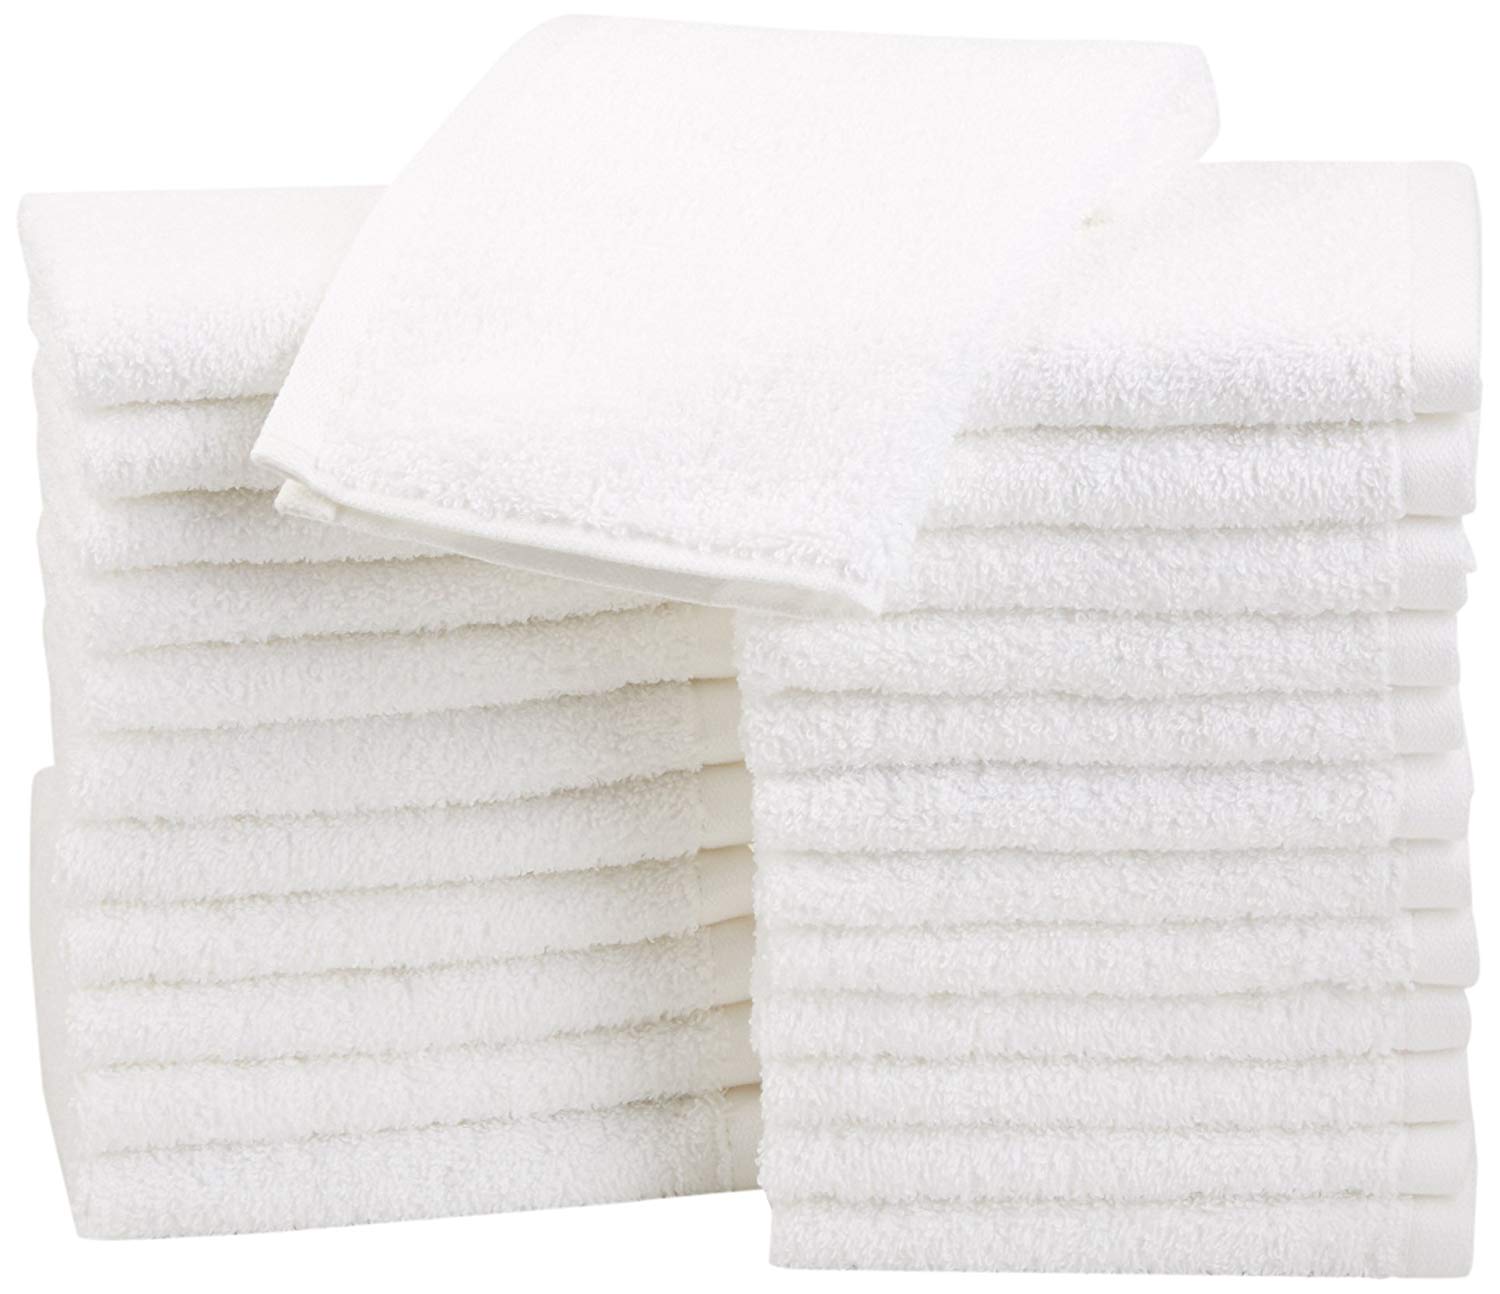 COTON MODE/® White Hygiene Biofresh Antibacterial Cotton Dish Cloth Super Soft Absorbent Kitchen Cloth Professional Catering Wash Cloth Pack of 10 Cloths